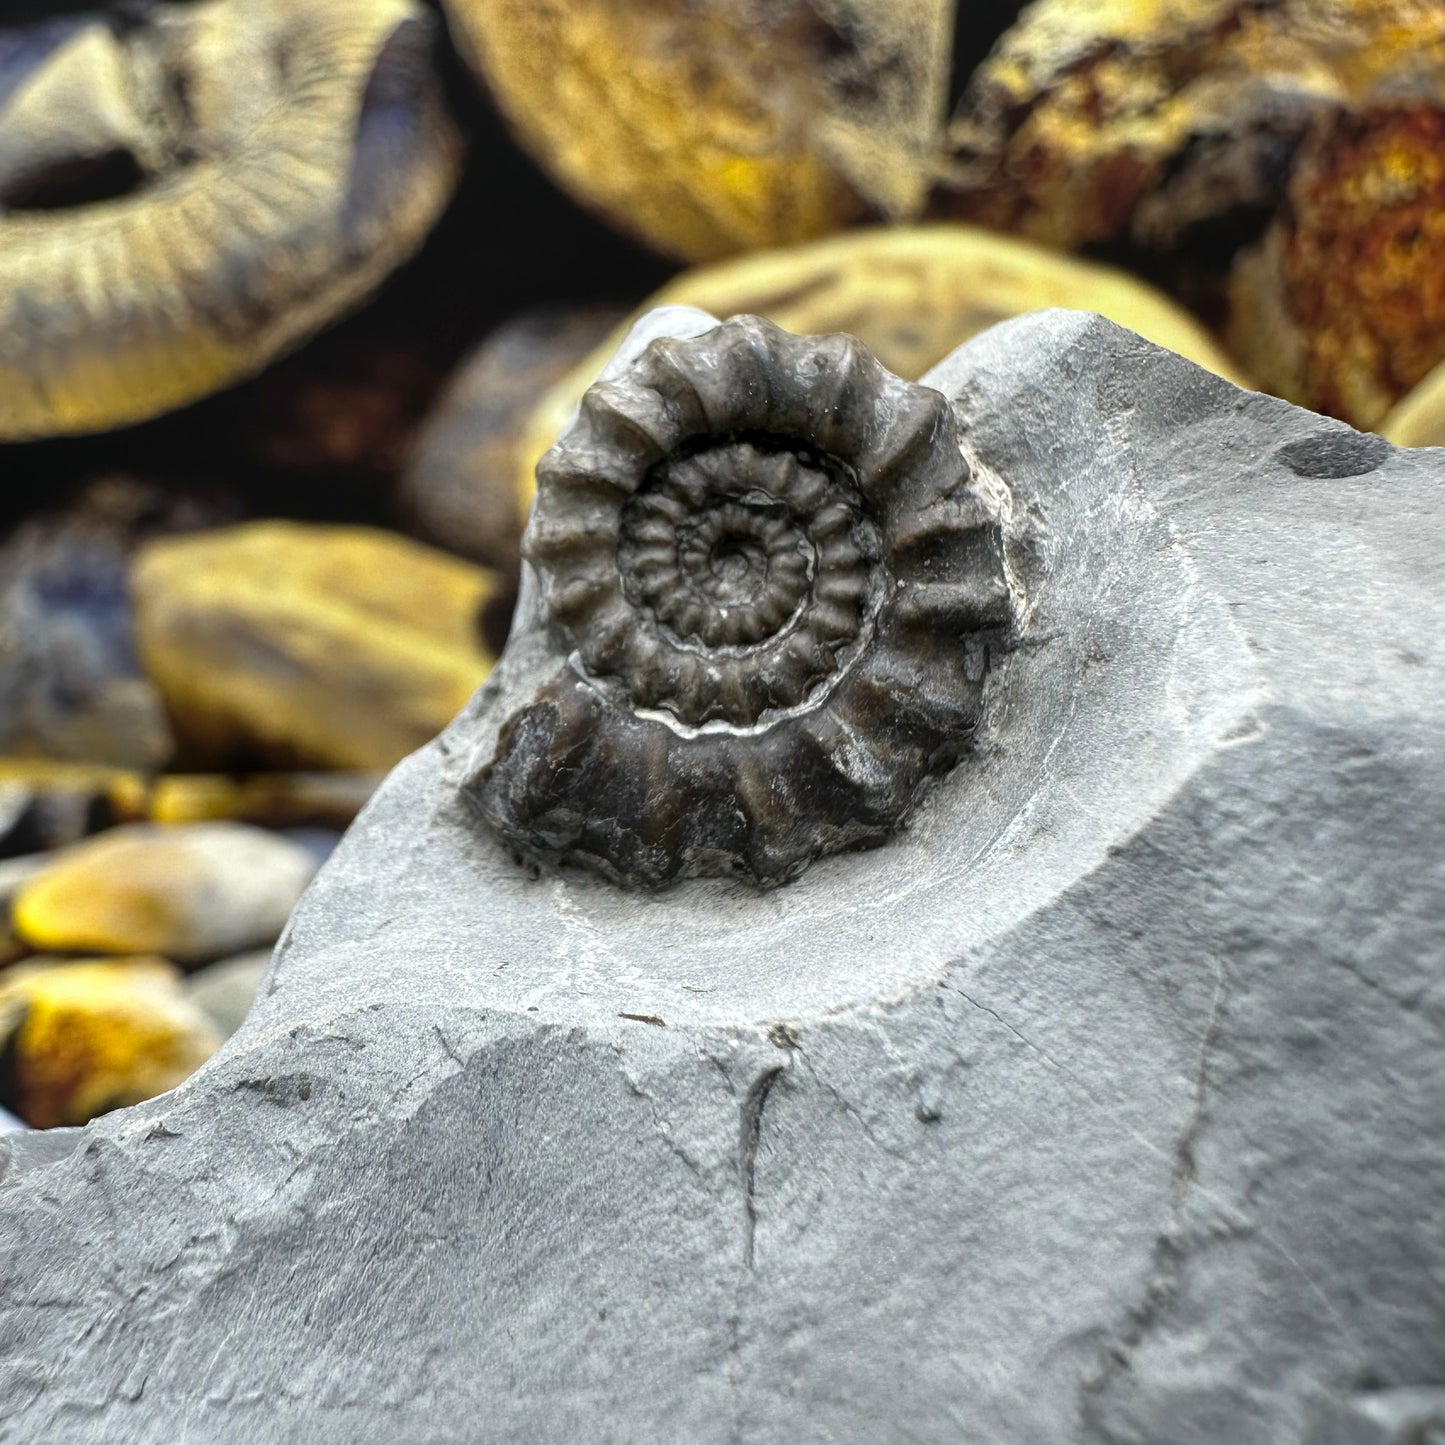 Gagaticeras ammonite fossil - Whitby, North Yorkshire